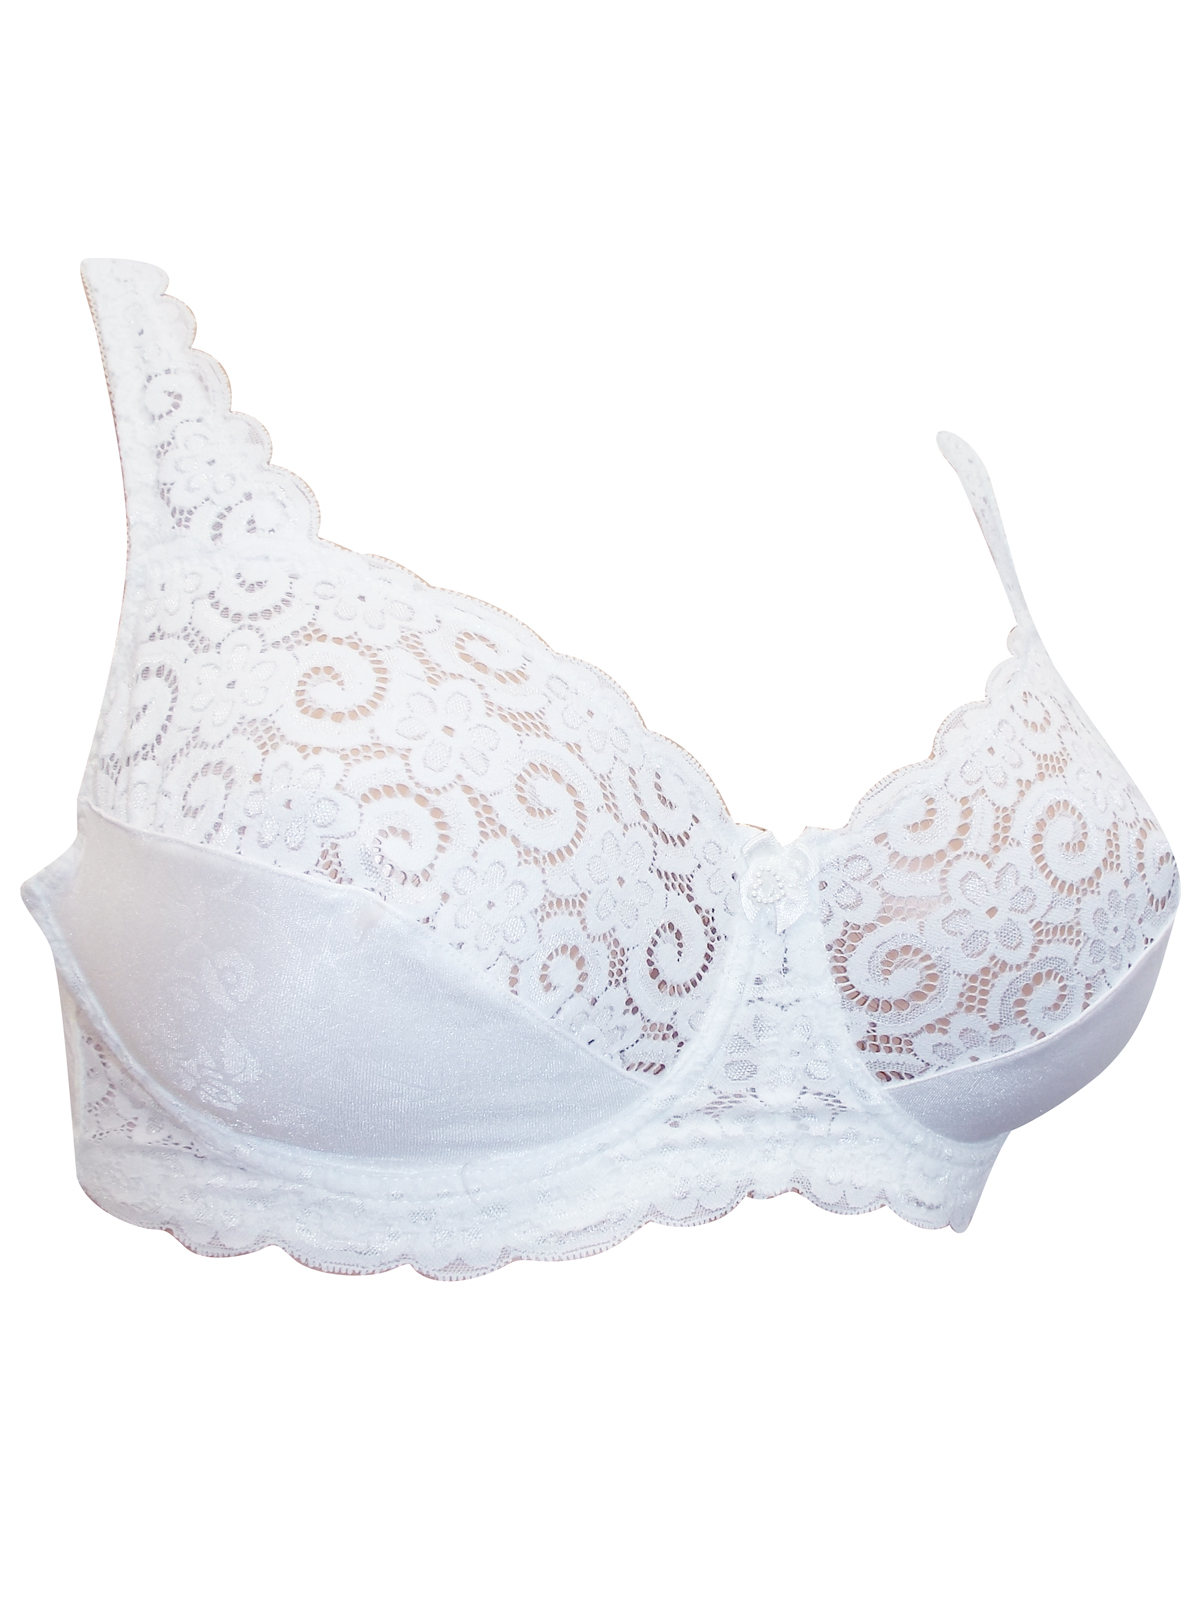 Naturana - - Naturana WHITE Floral Lace Soft Cup Underwired Full Cup ...